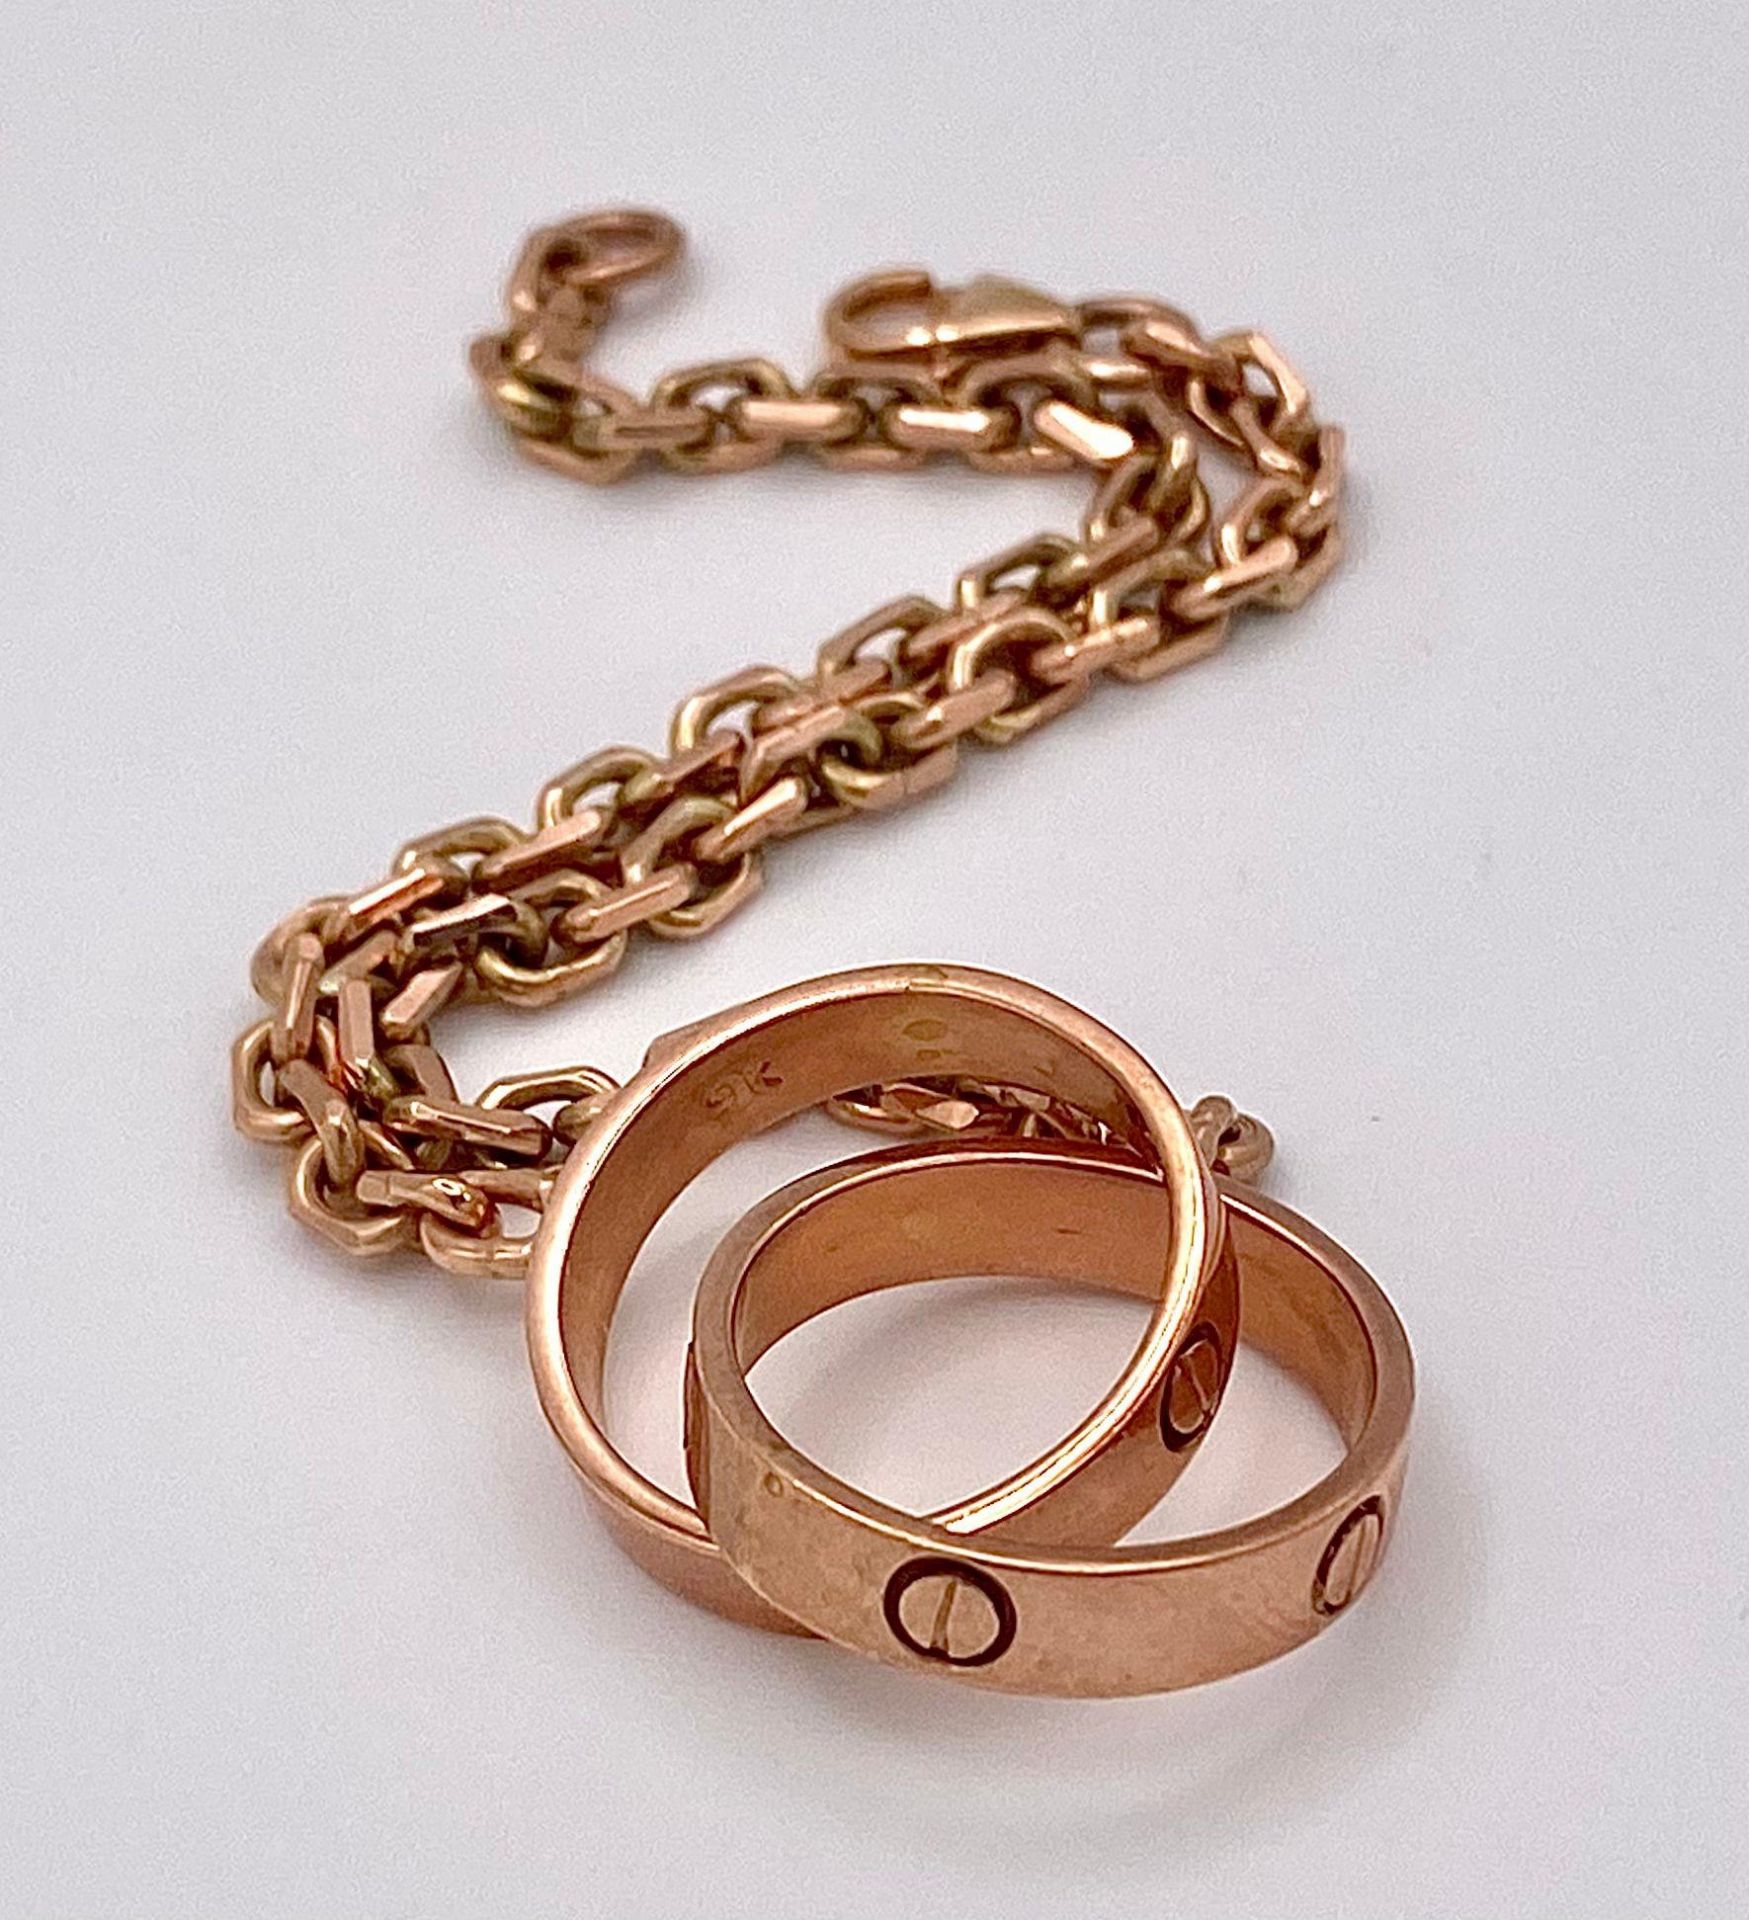 A 9K Rose Gold Entwined Ring Bracelet. 18cm length. 10.7g weight.